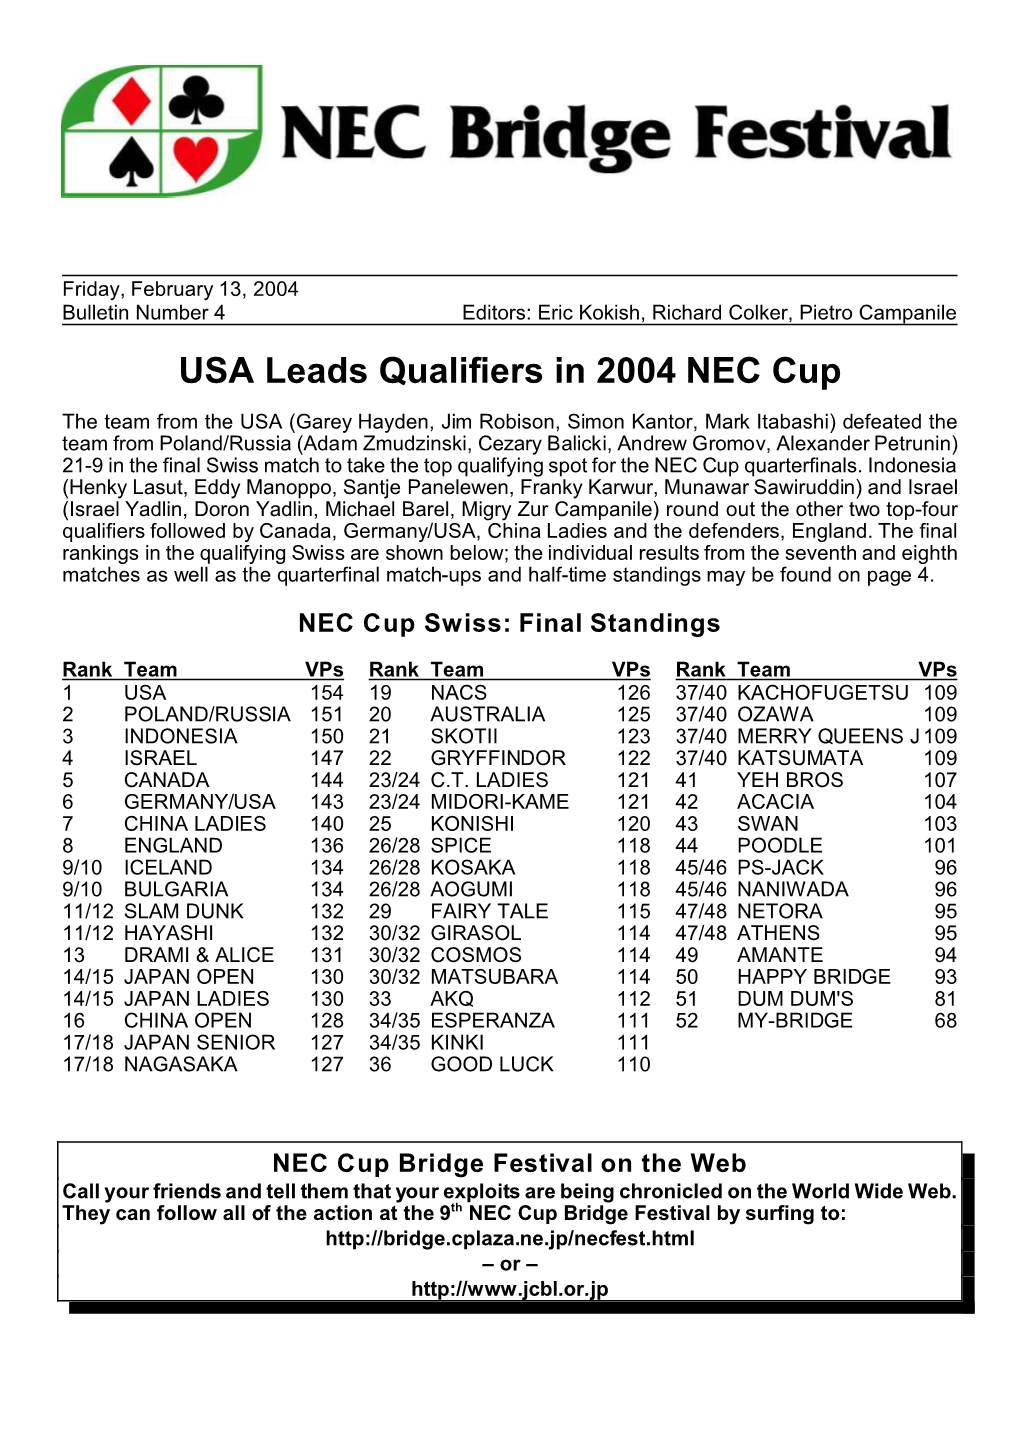 USA Leads Qualifiers in 2004 NEC Cup